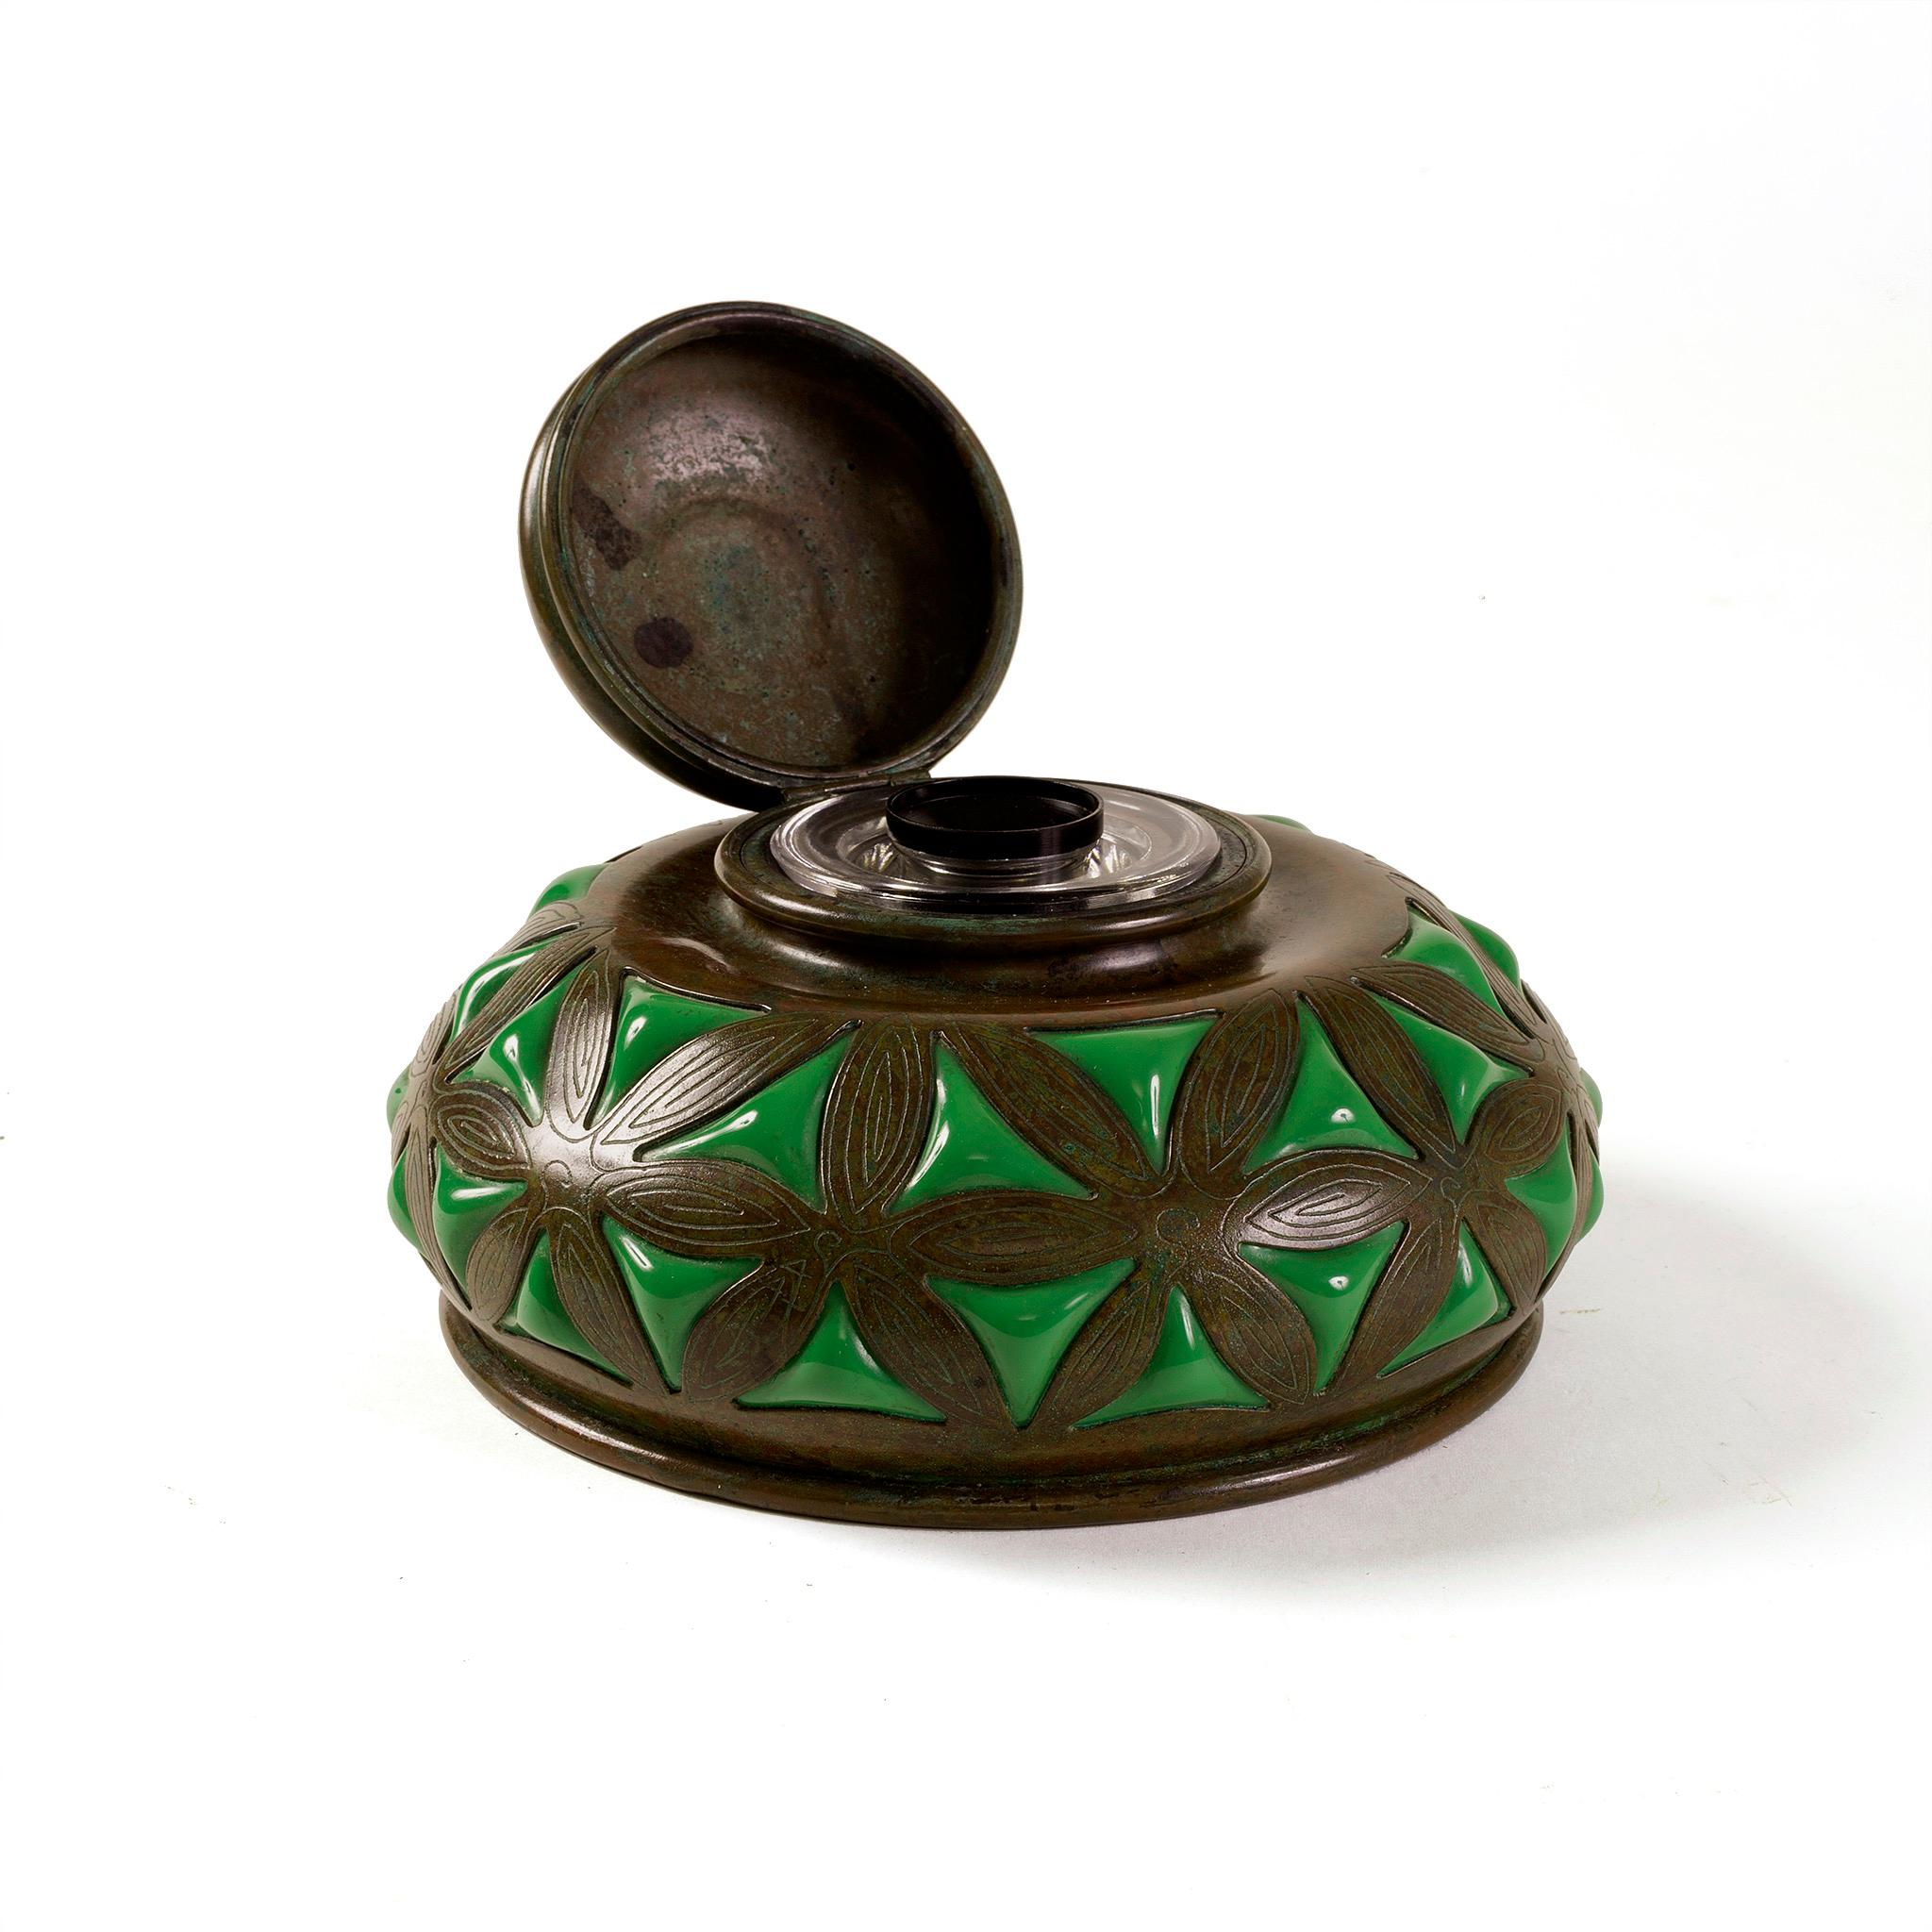 Among the most visually alluring and technically excellent of all Tiffany Studios New York's desk accessories, the exciting design for this refined but robustly rounded inkwell features green blown glass in pinched triangular forms that appear to